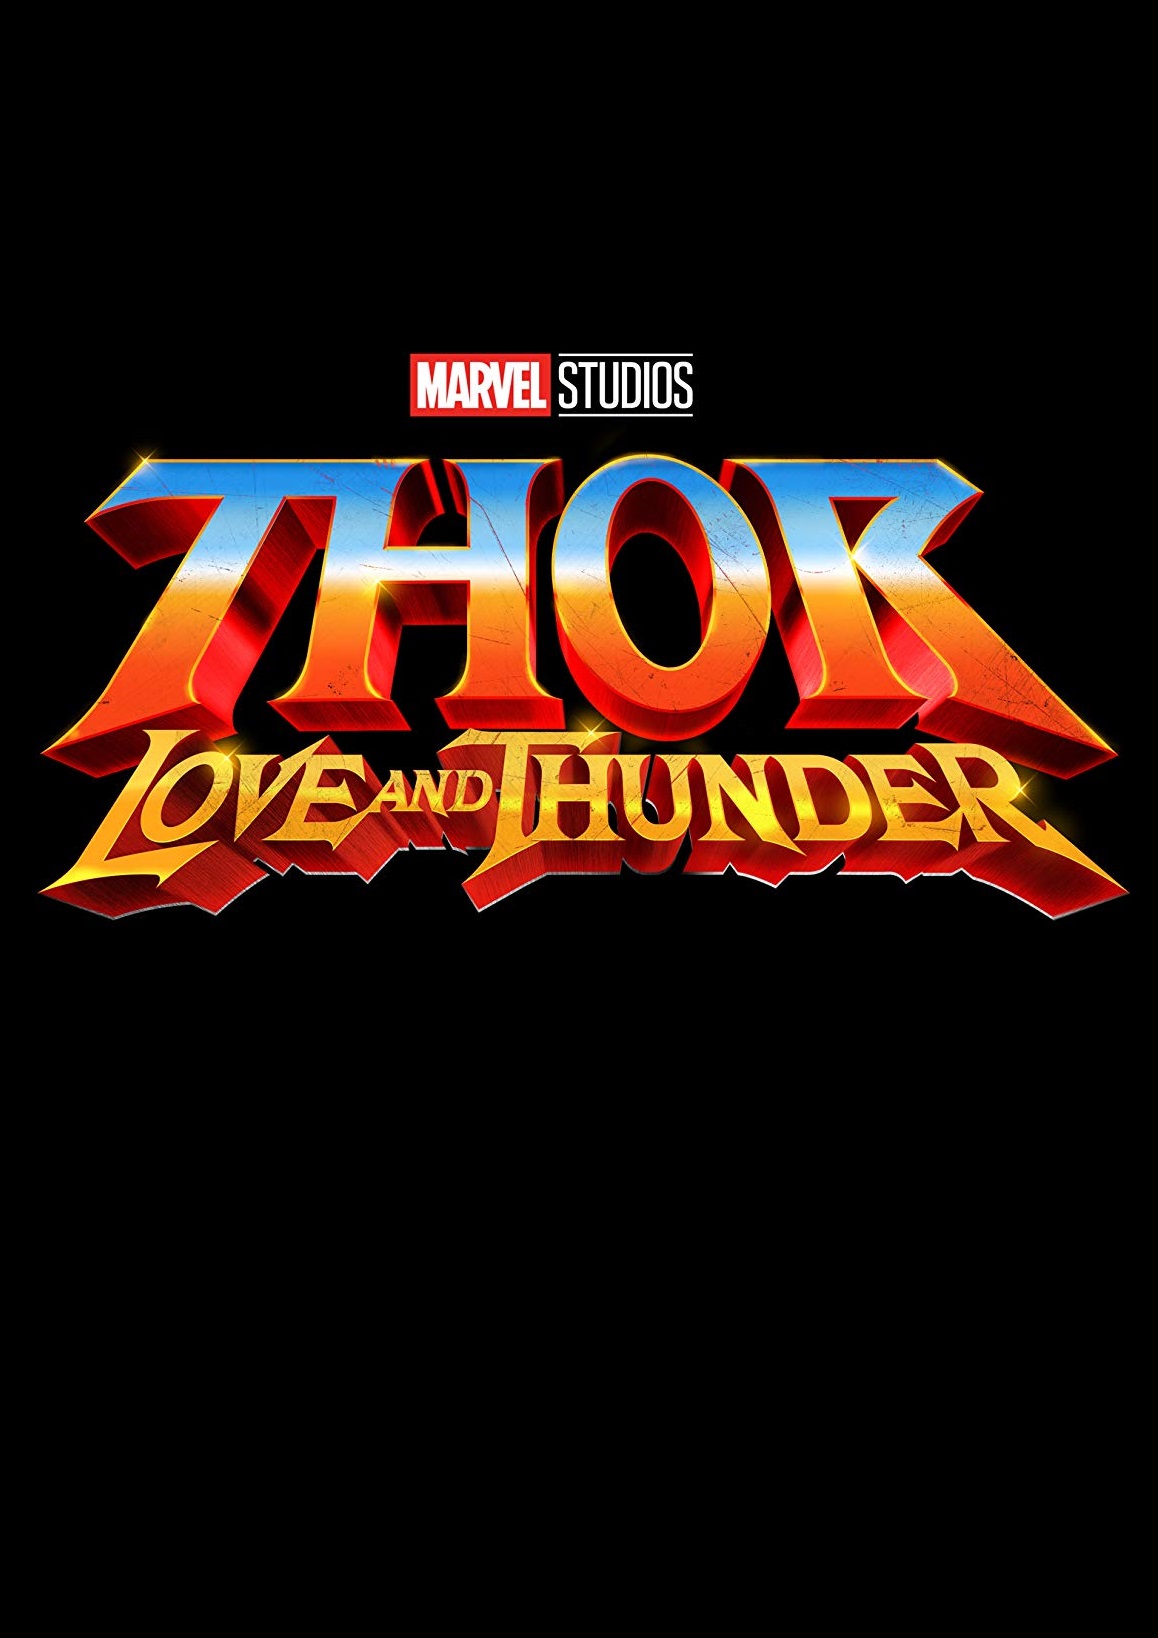 Thor: Love and Thunder Trailer out now!